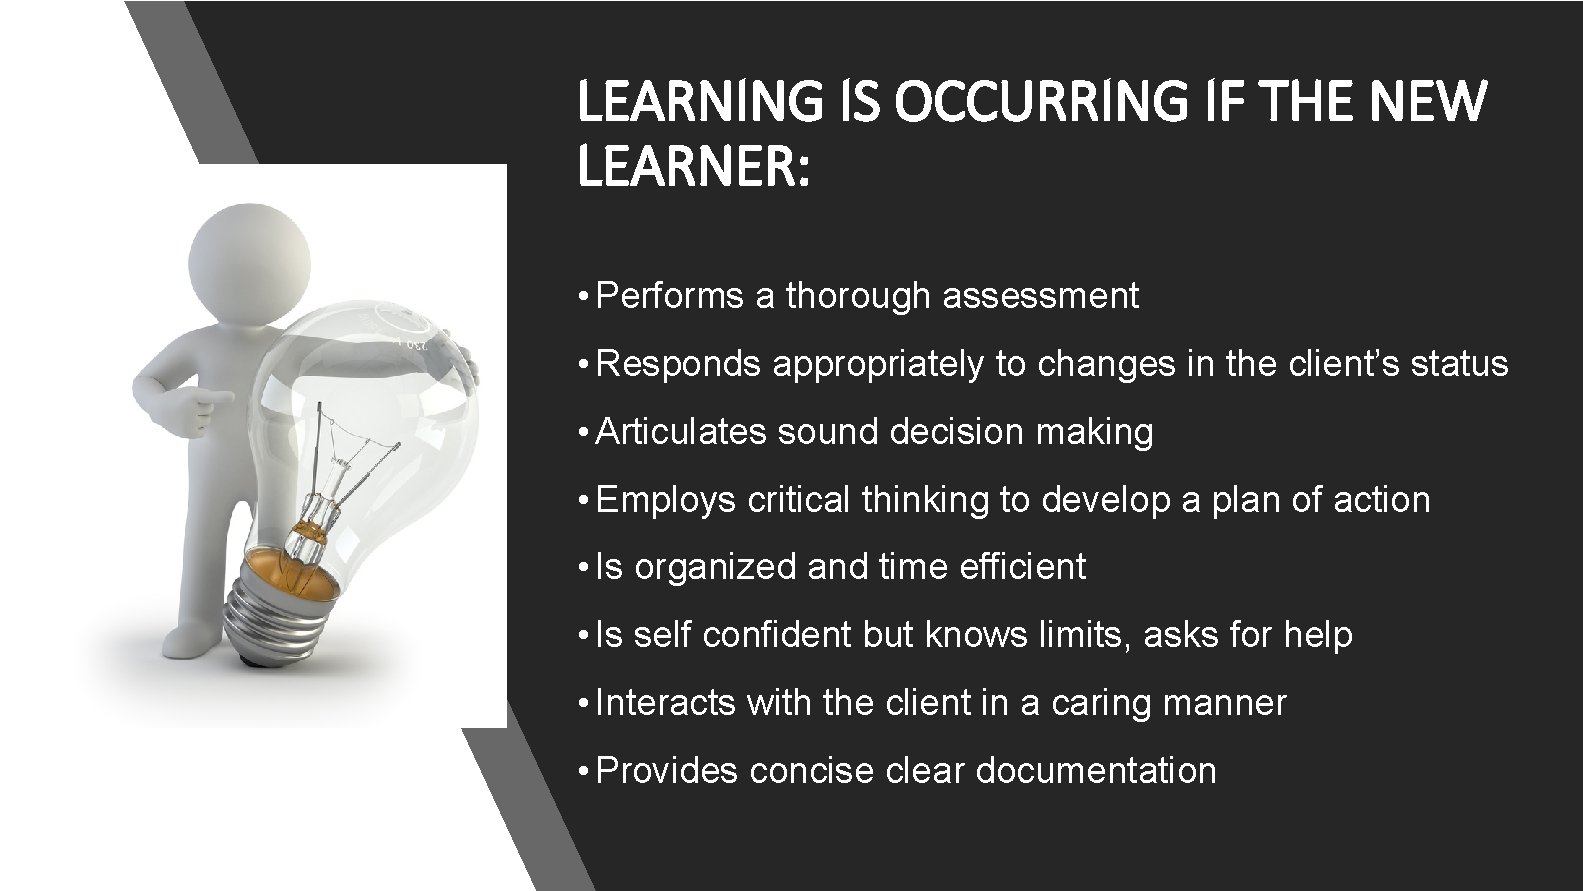 LEARNING IS OCCURRING IF THE NEW LEARNER: • Performs a thorough assessment • Responds